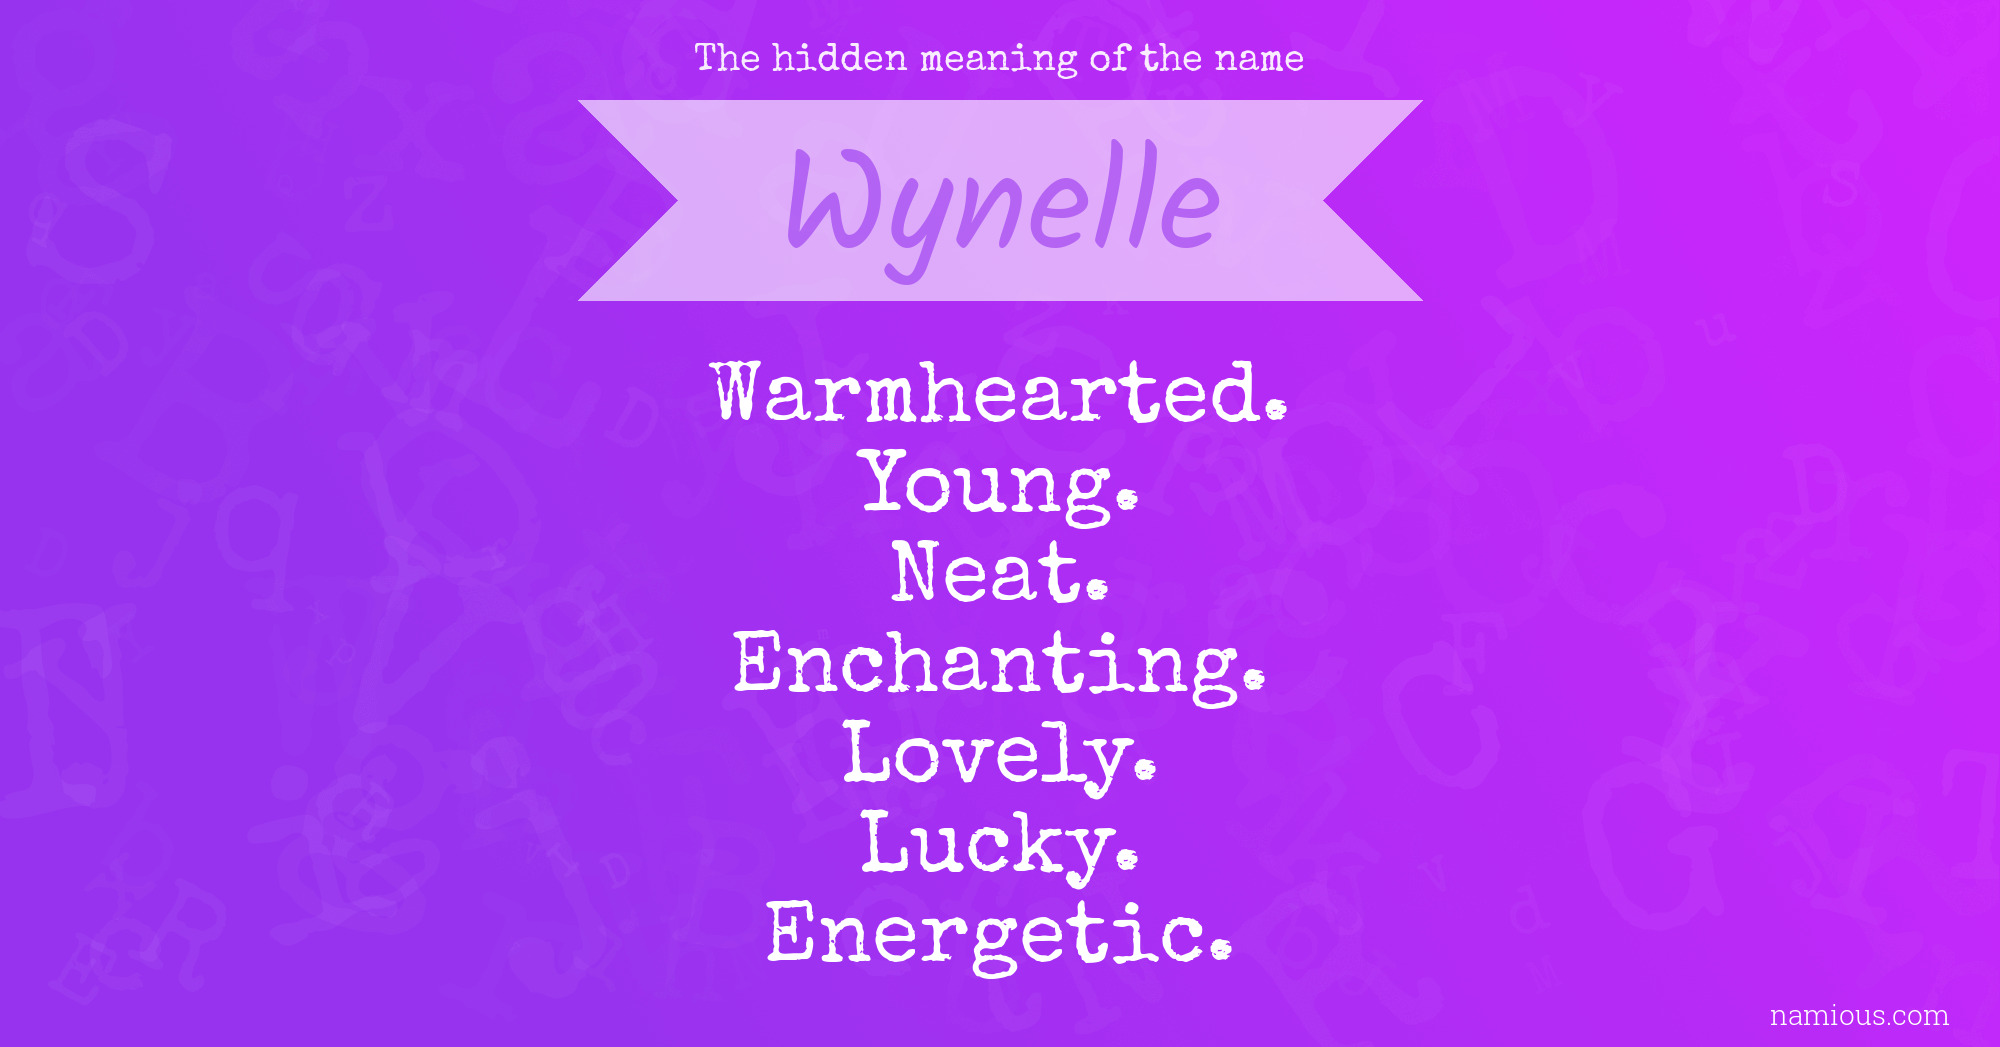 The hidden meaning of the name Wynelle